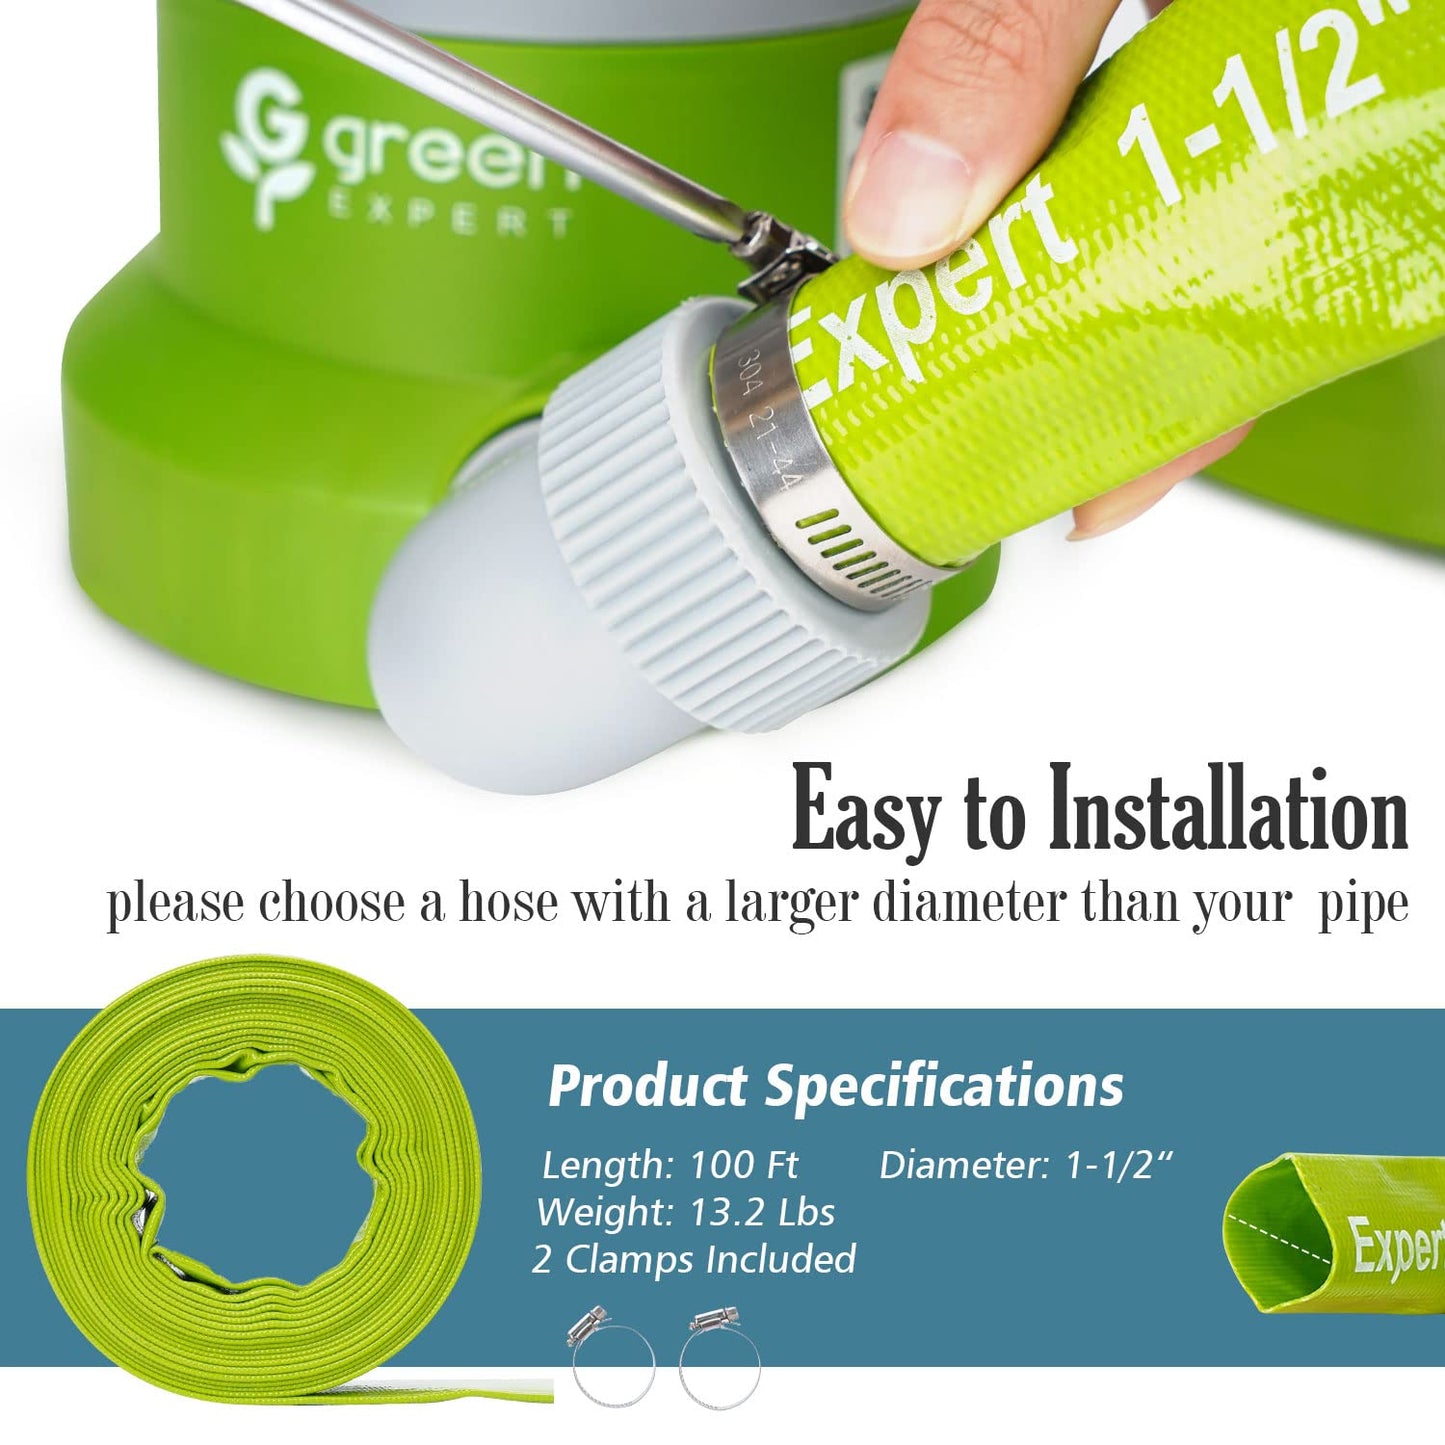 Green Expert 1-1/2" ID PVC Lay-Flat Discharge and Backwash Hose 100 Feet Heavy Duty Pool Hose with Clamps Easy Installation for Water Removal Compatible with Filters Pumps 527504